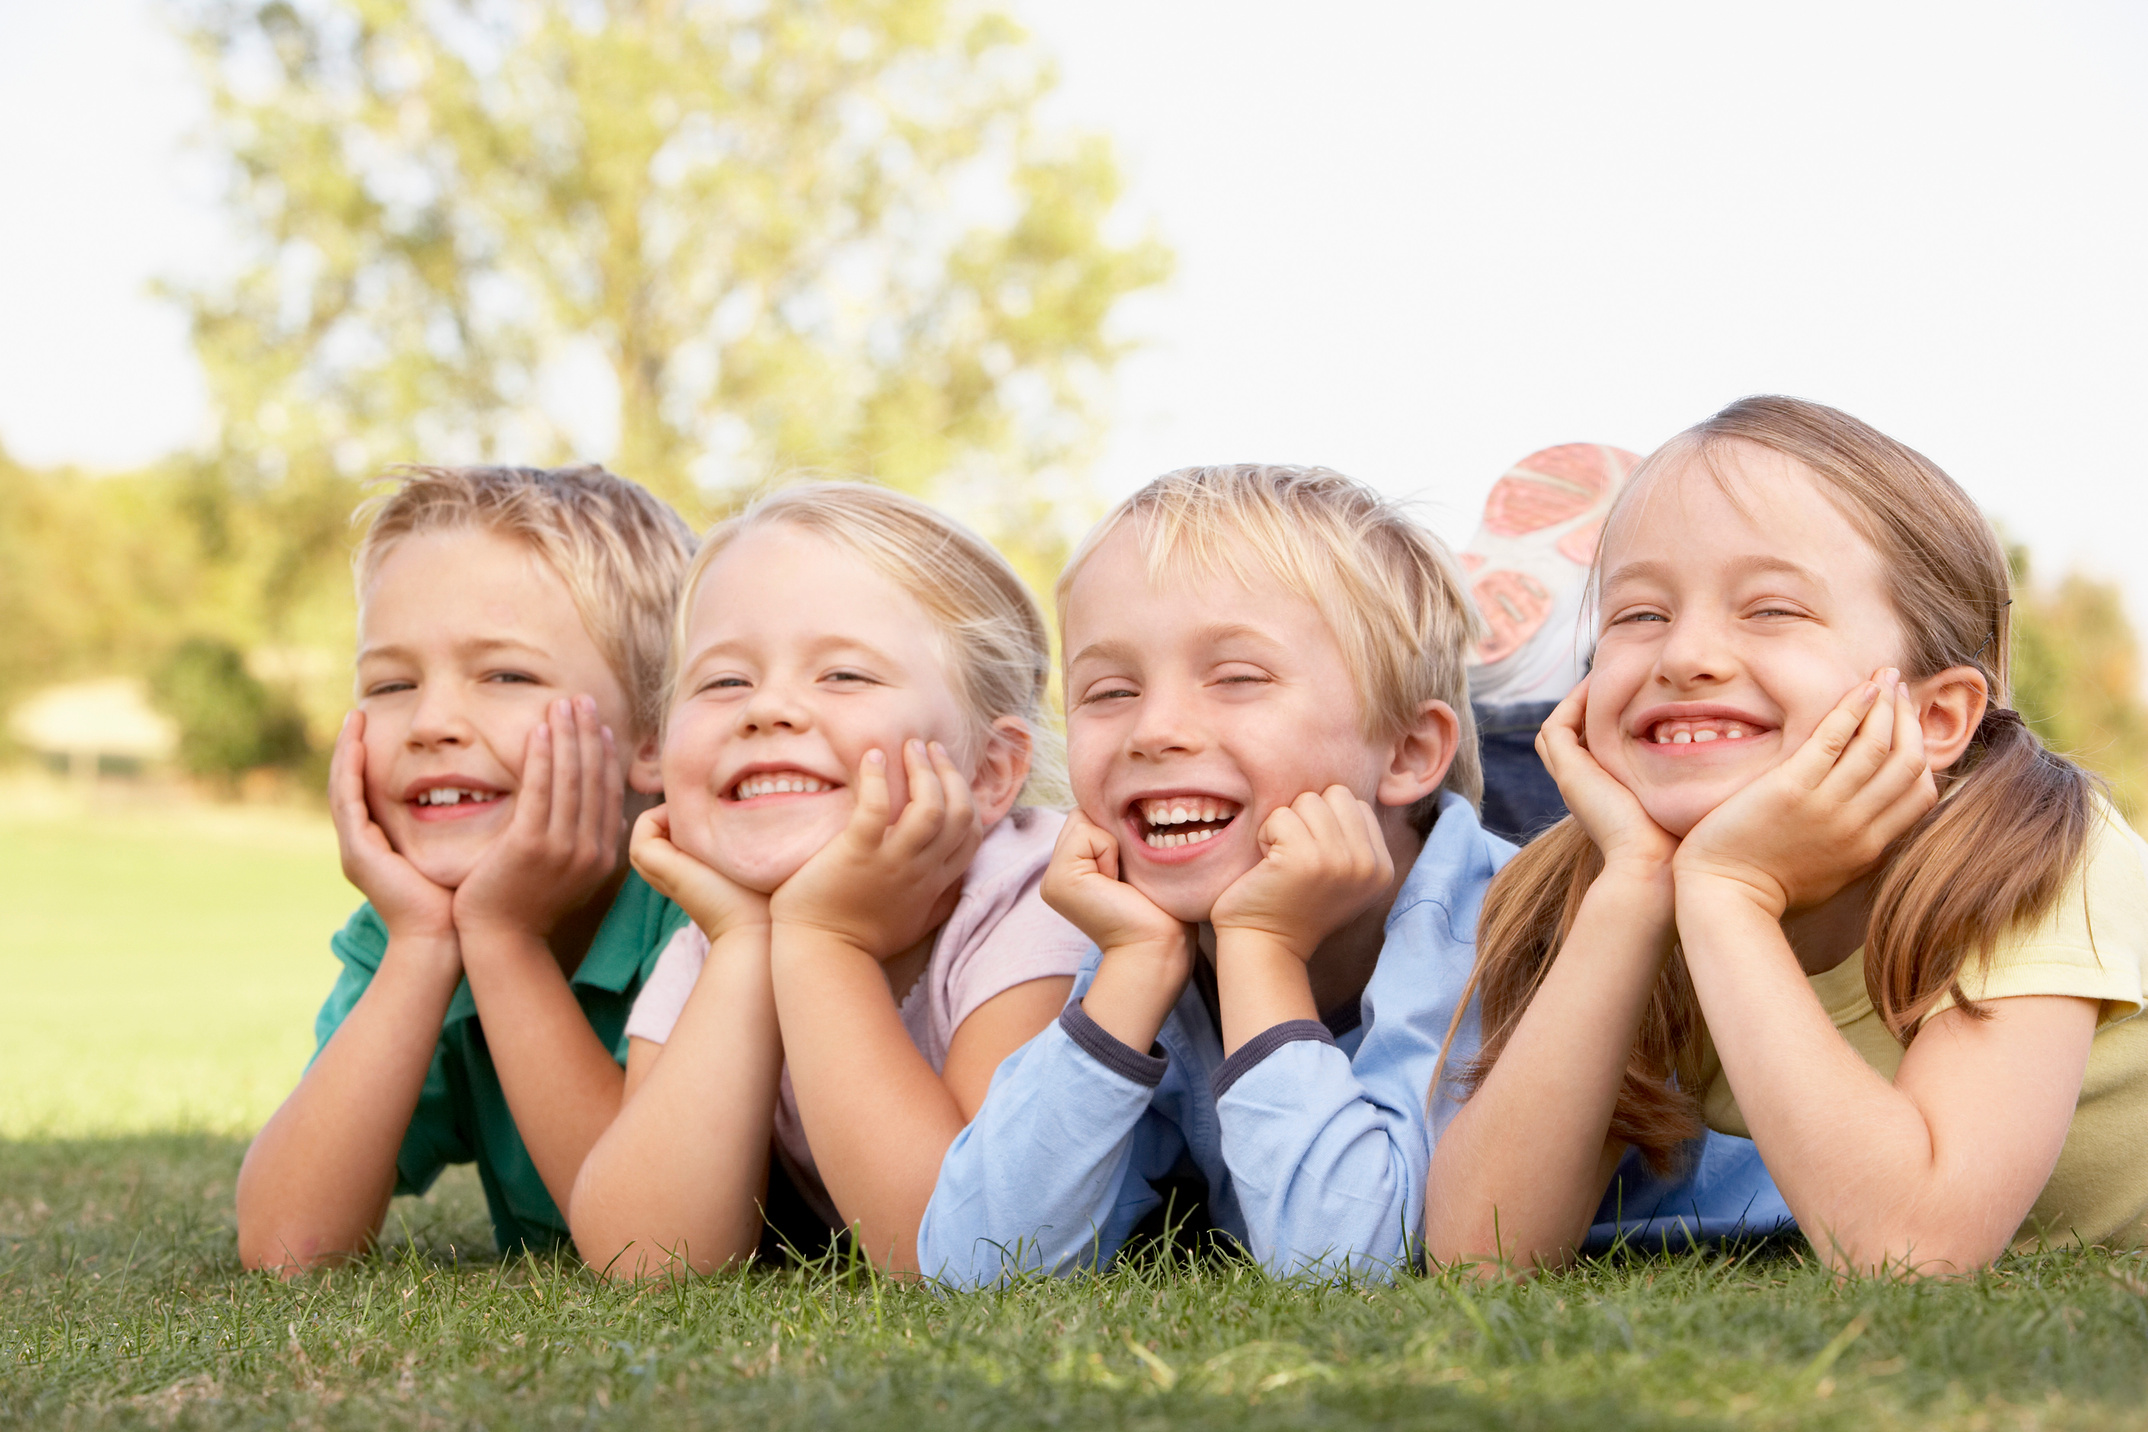 Kids smiling outdoors